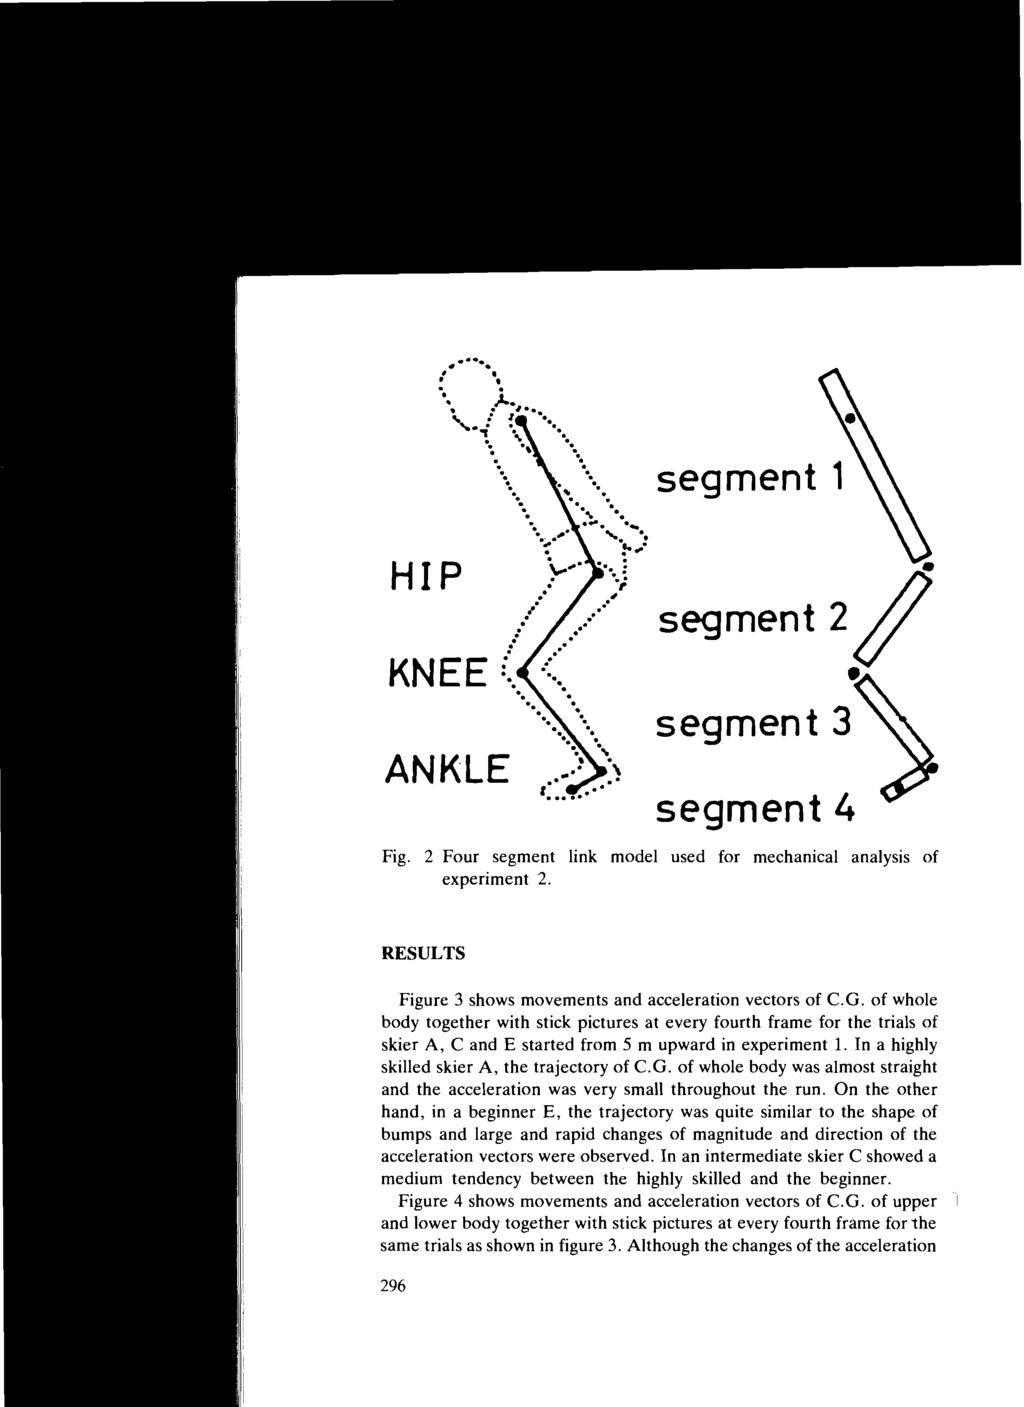 o " HIP KNEE o o o o ANKLE ". segment 1 o o o o. 2/ segment segment 3 segment 4 Fig. 2 Four segment link model used for mechanical analysis of experiment 2.